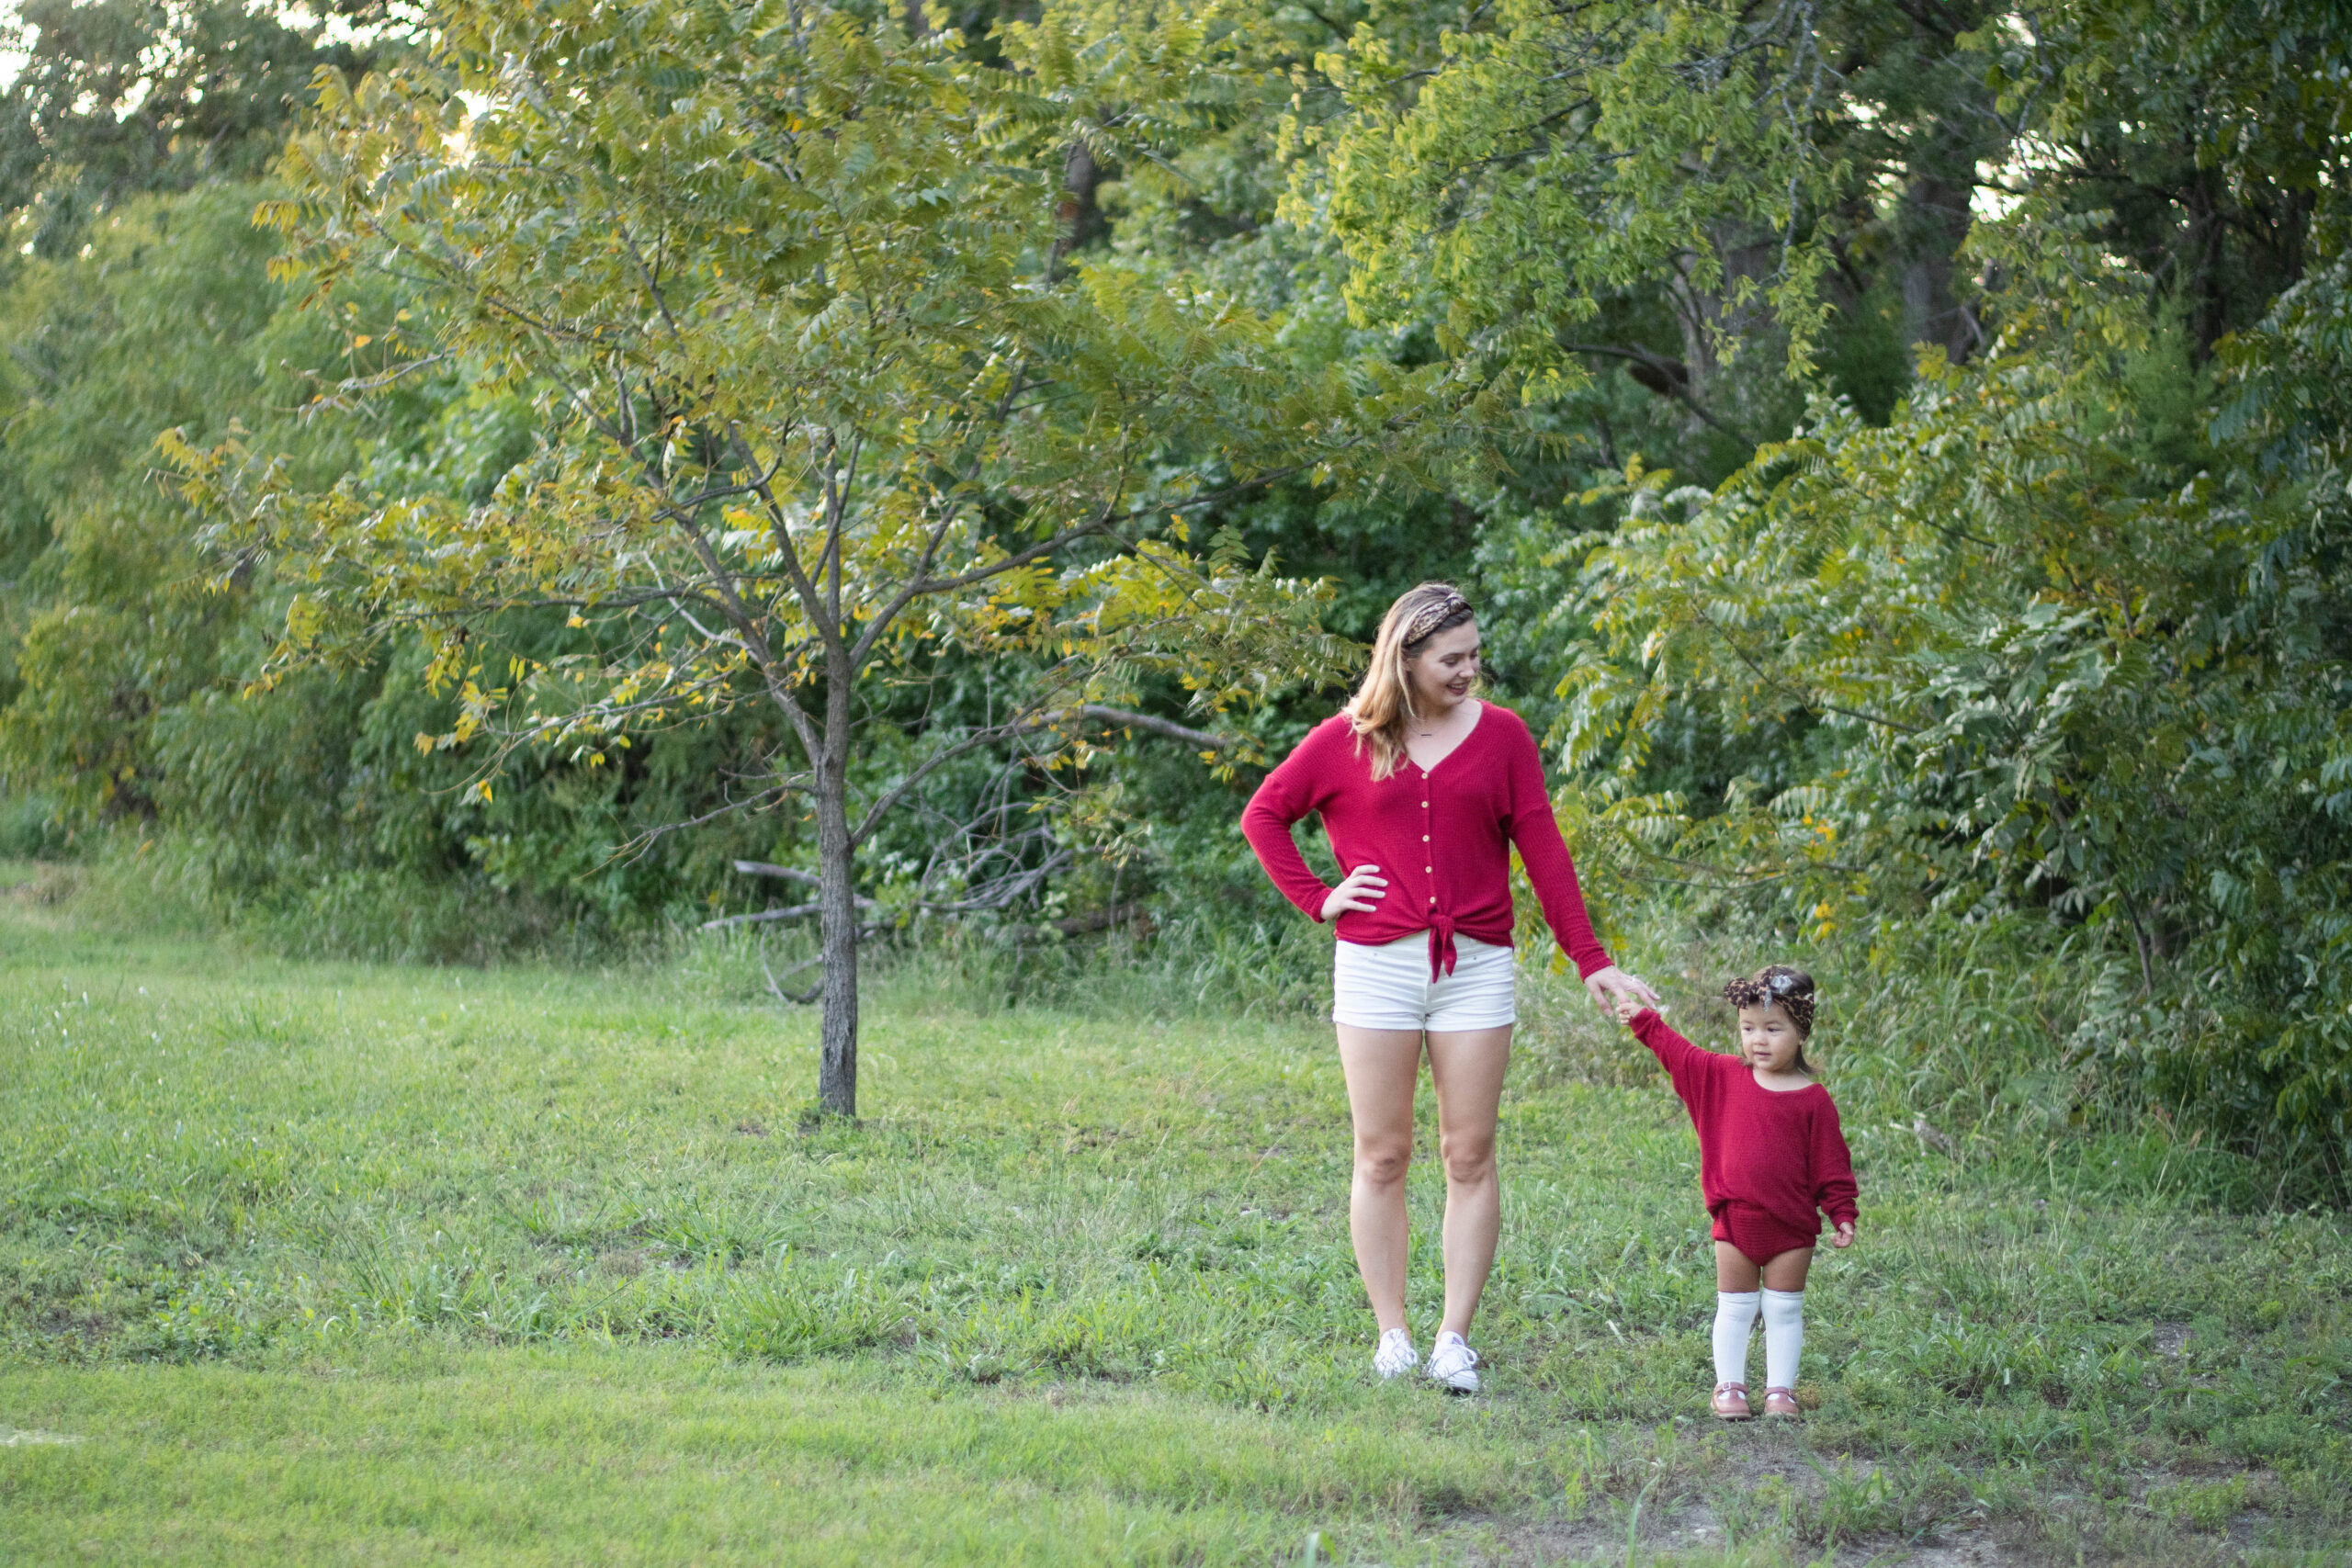 Elizabeth and her daughter stand in a field in front of some green trees with just a hint of autumn coloring on the tips of their leaves. Elizabeth wears a top that she has sewn, and her daughter wears a matching outfit, sewn by Mama, as they hold hands.